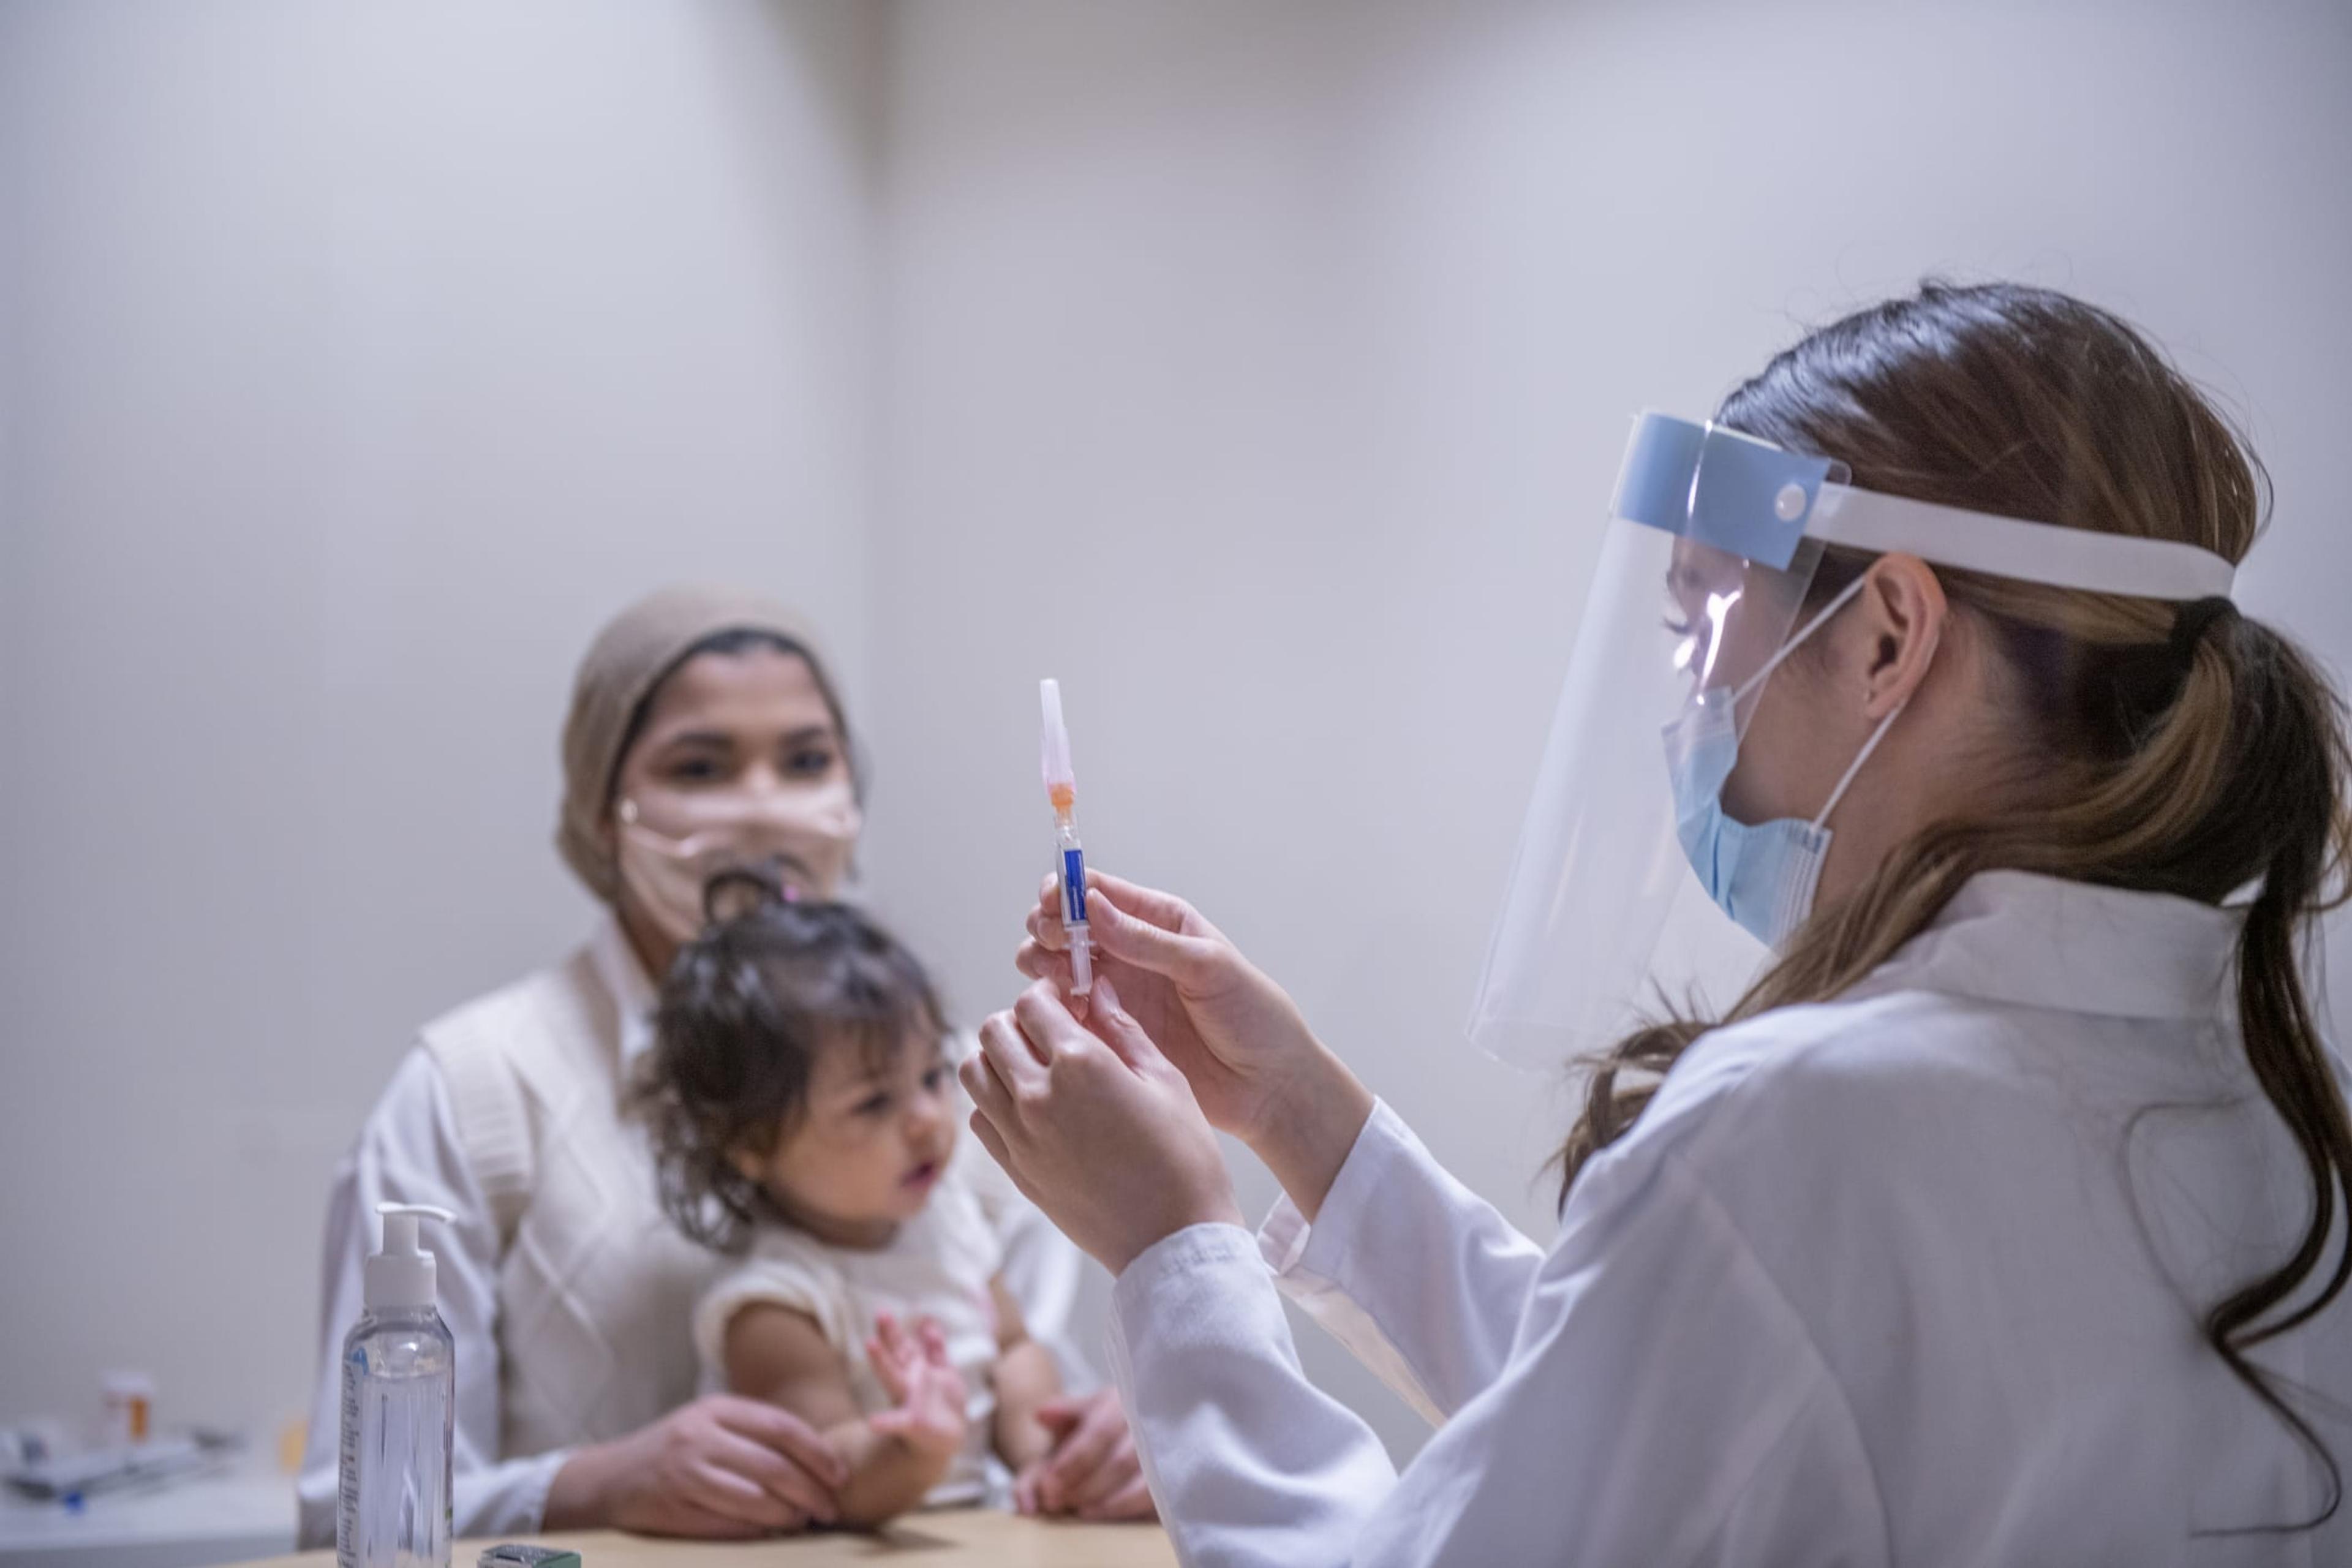 A Muslim mother wearing a hijab is with her young daughter at the doctor's office. The female doctor is preparing the medical syringe to administer the vaccine injection to her patients.